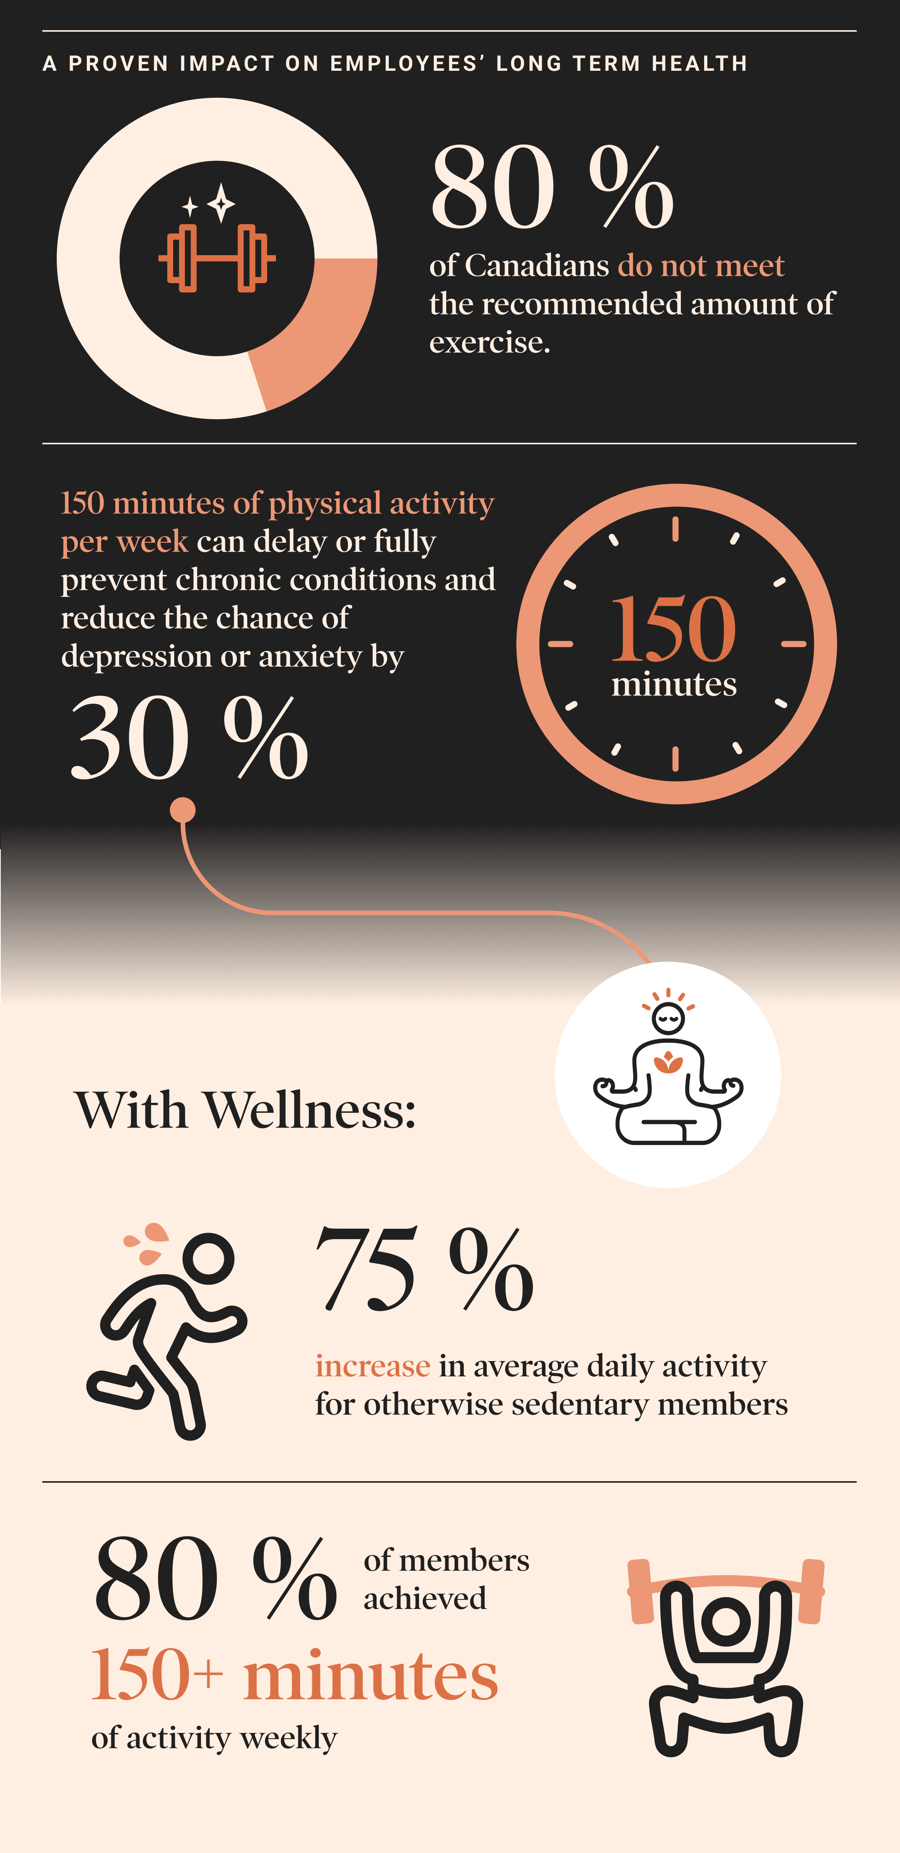 A proven impact on employees’ long term health: 80% of Canadians do not meet the recommended amount of exercise. 150 minutes of physical activity per week can delay or fully prevent chronic conditions and reduce the chance of depression or anxiety by 30%. With Wellness: 75% increase in average daily activity for otherwise sedentary members. 80% of members achieved 150+ minutes of activity weekly